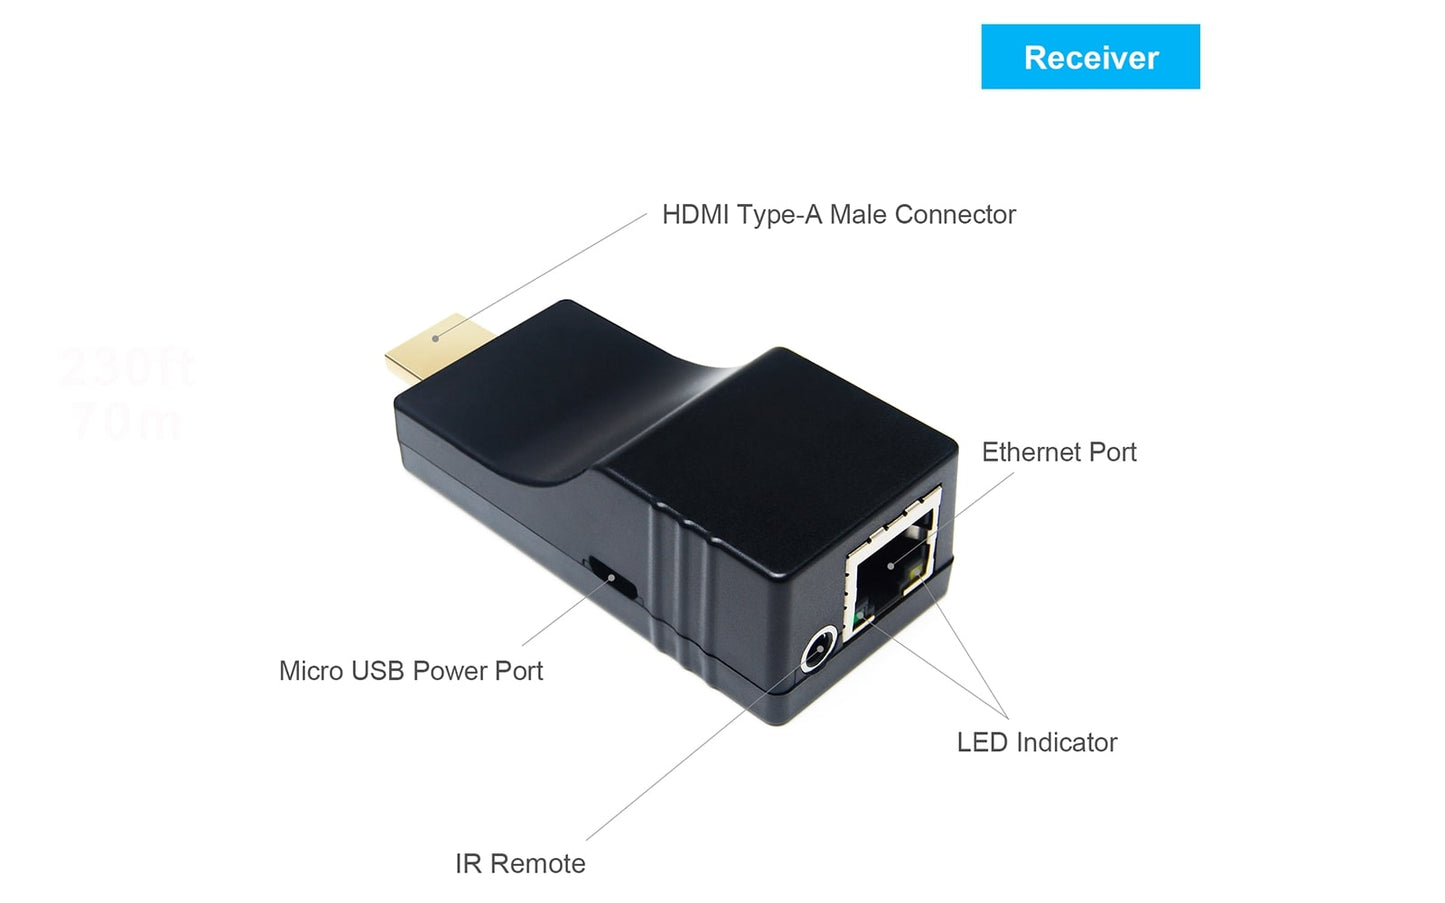 HE-35IR 4K HDMI Transmitter and Receiver- only receiver